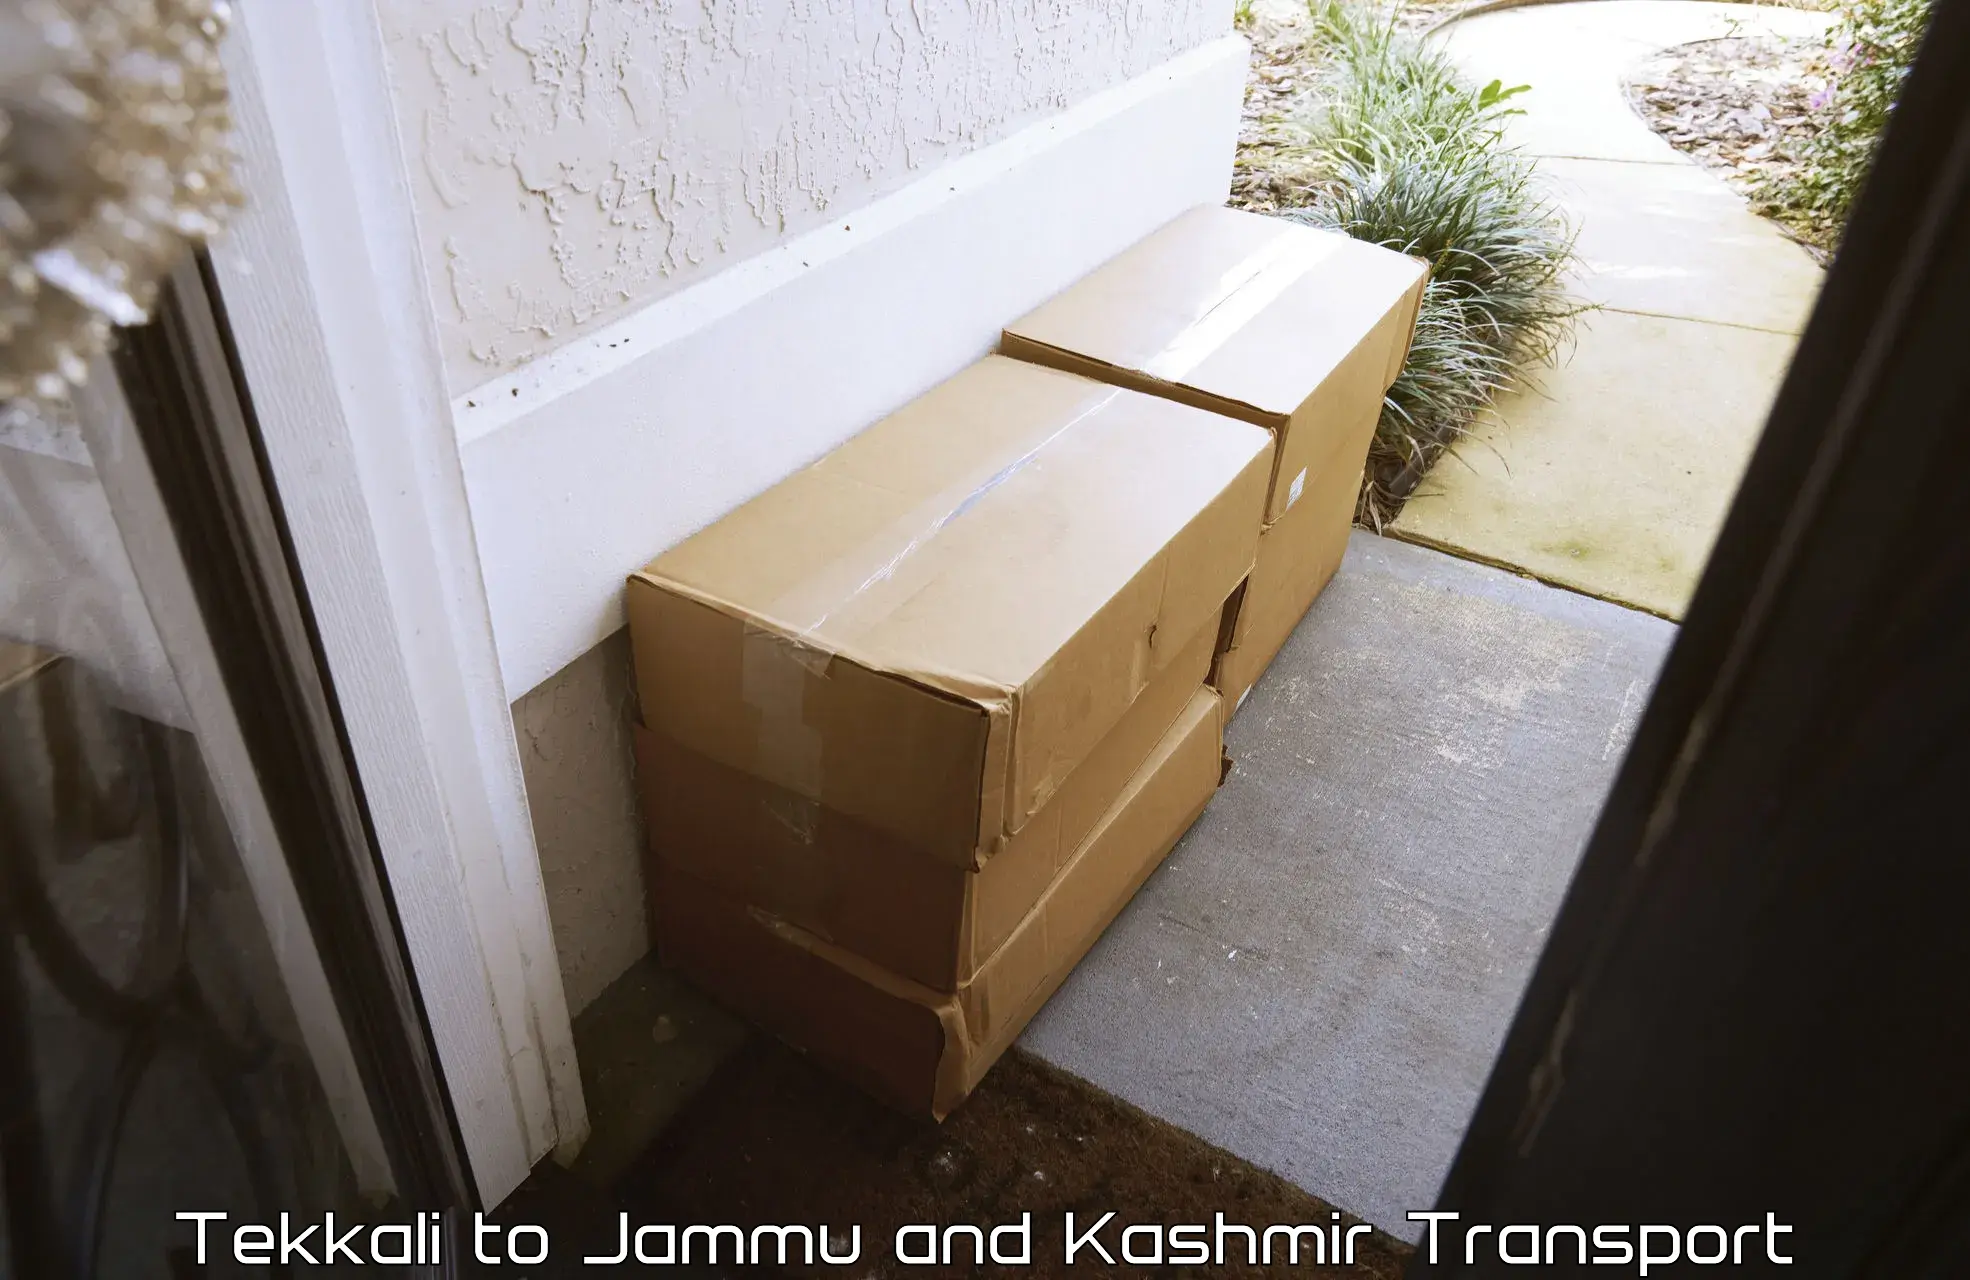 Air freight transport services Tekkali to Baramulla